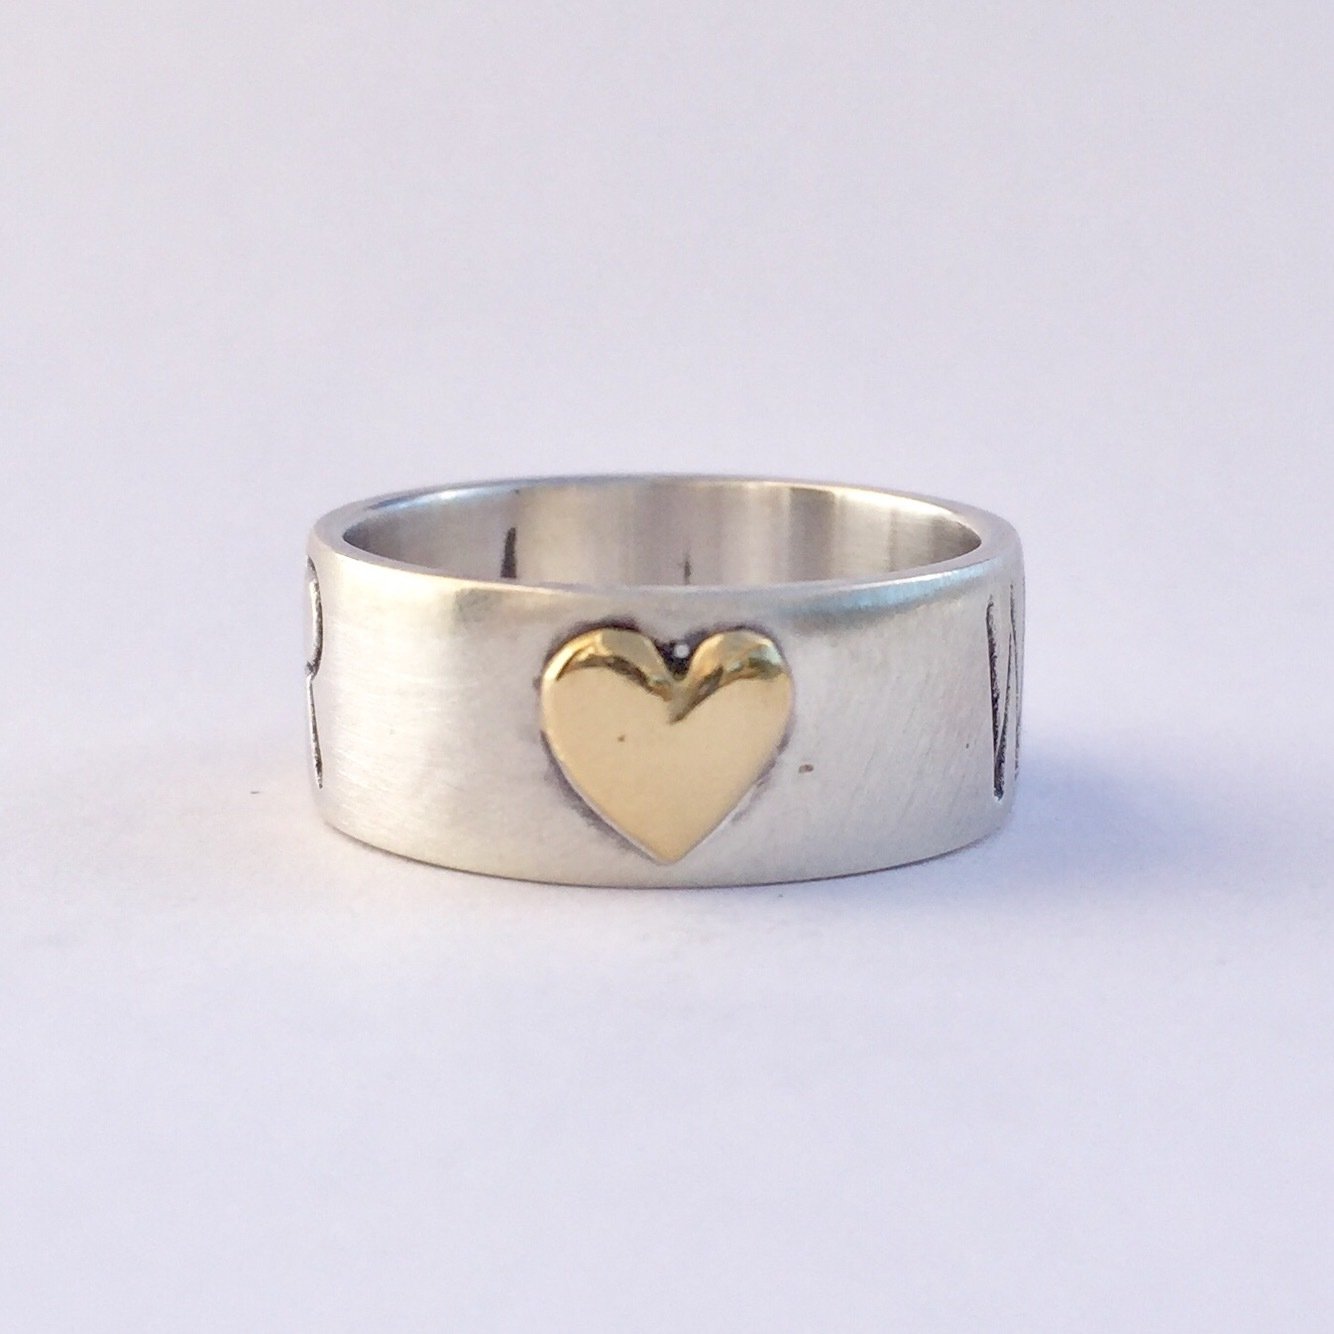 Warrior Ring Sterling Silver with 18k heart of gold 8mm (wide) band